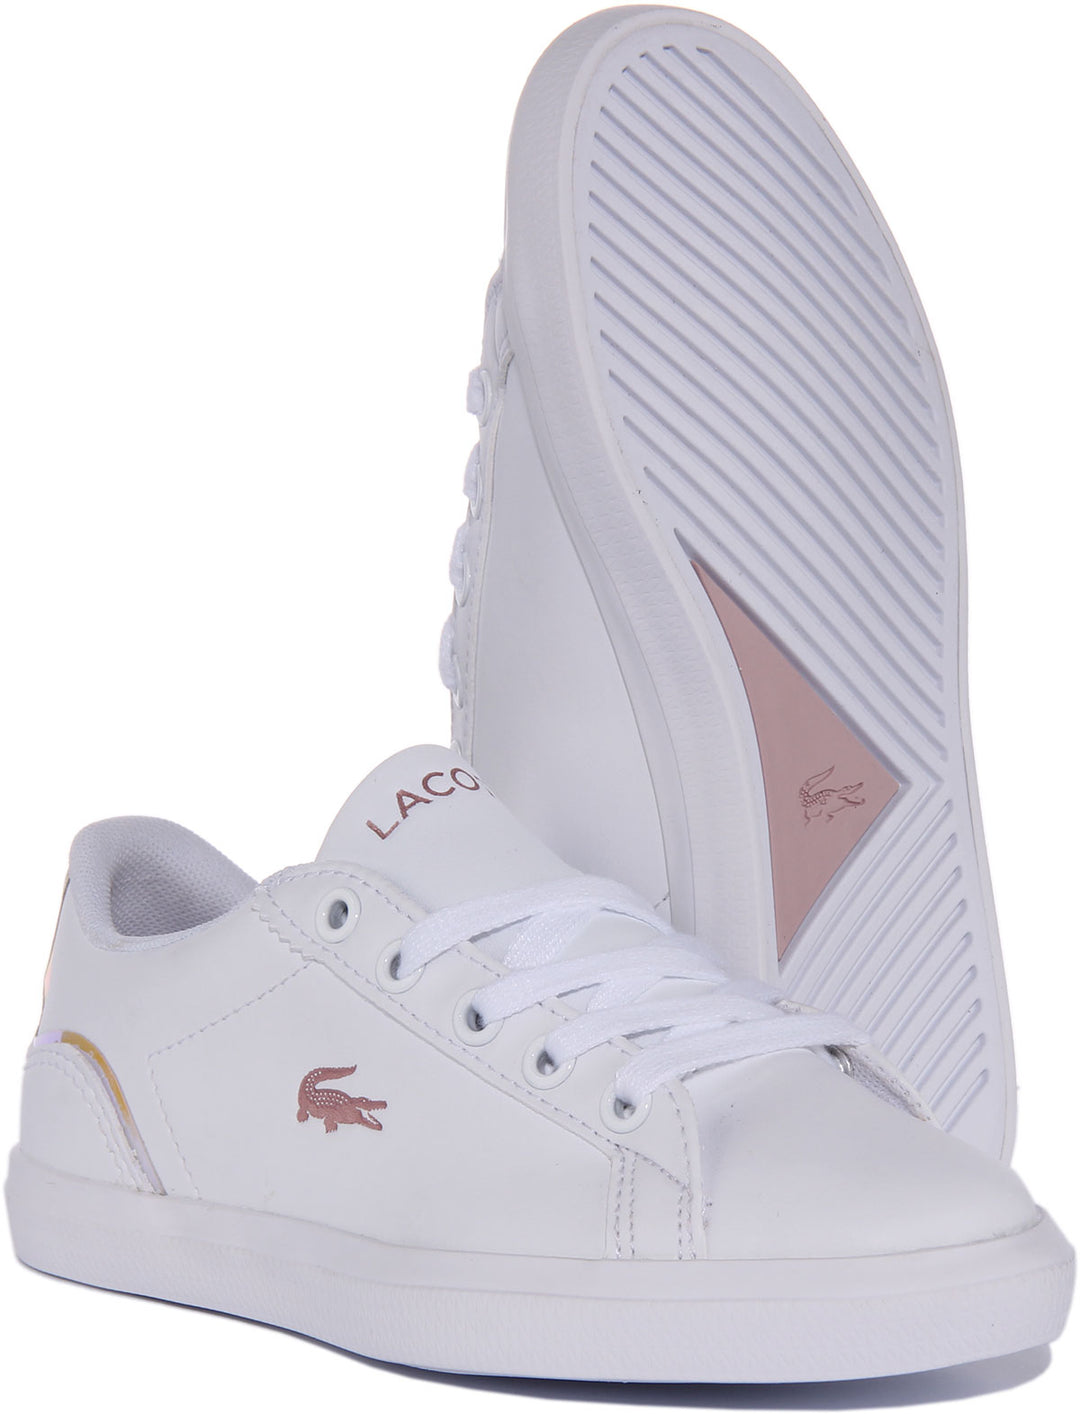 Lacoste Powercourt 222 In White For Kids